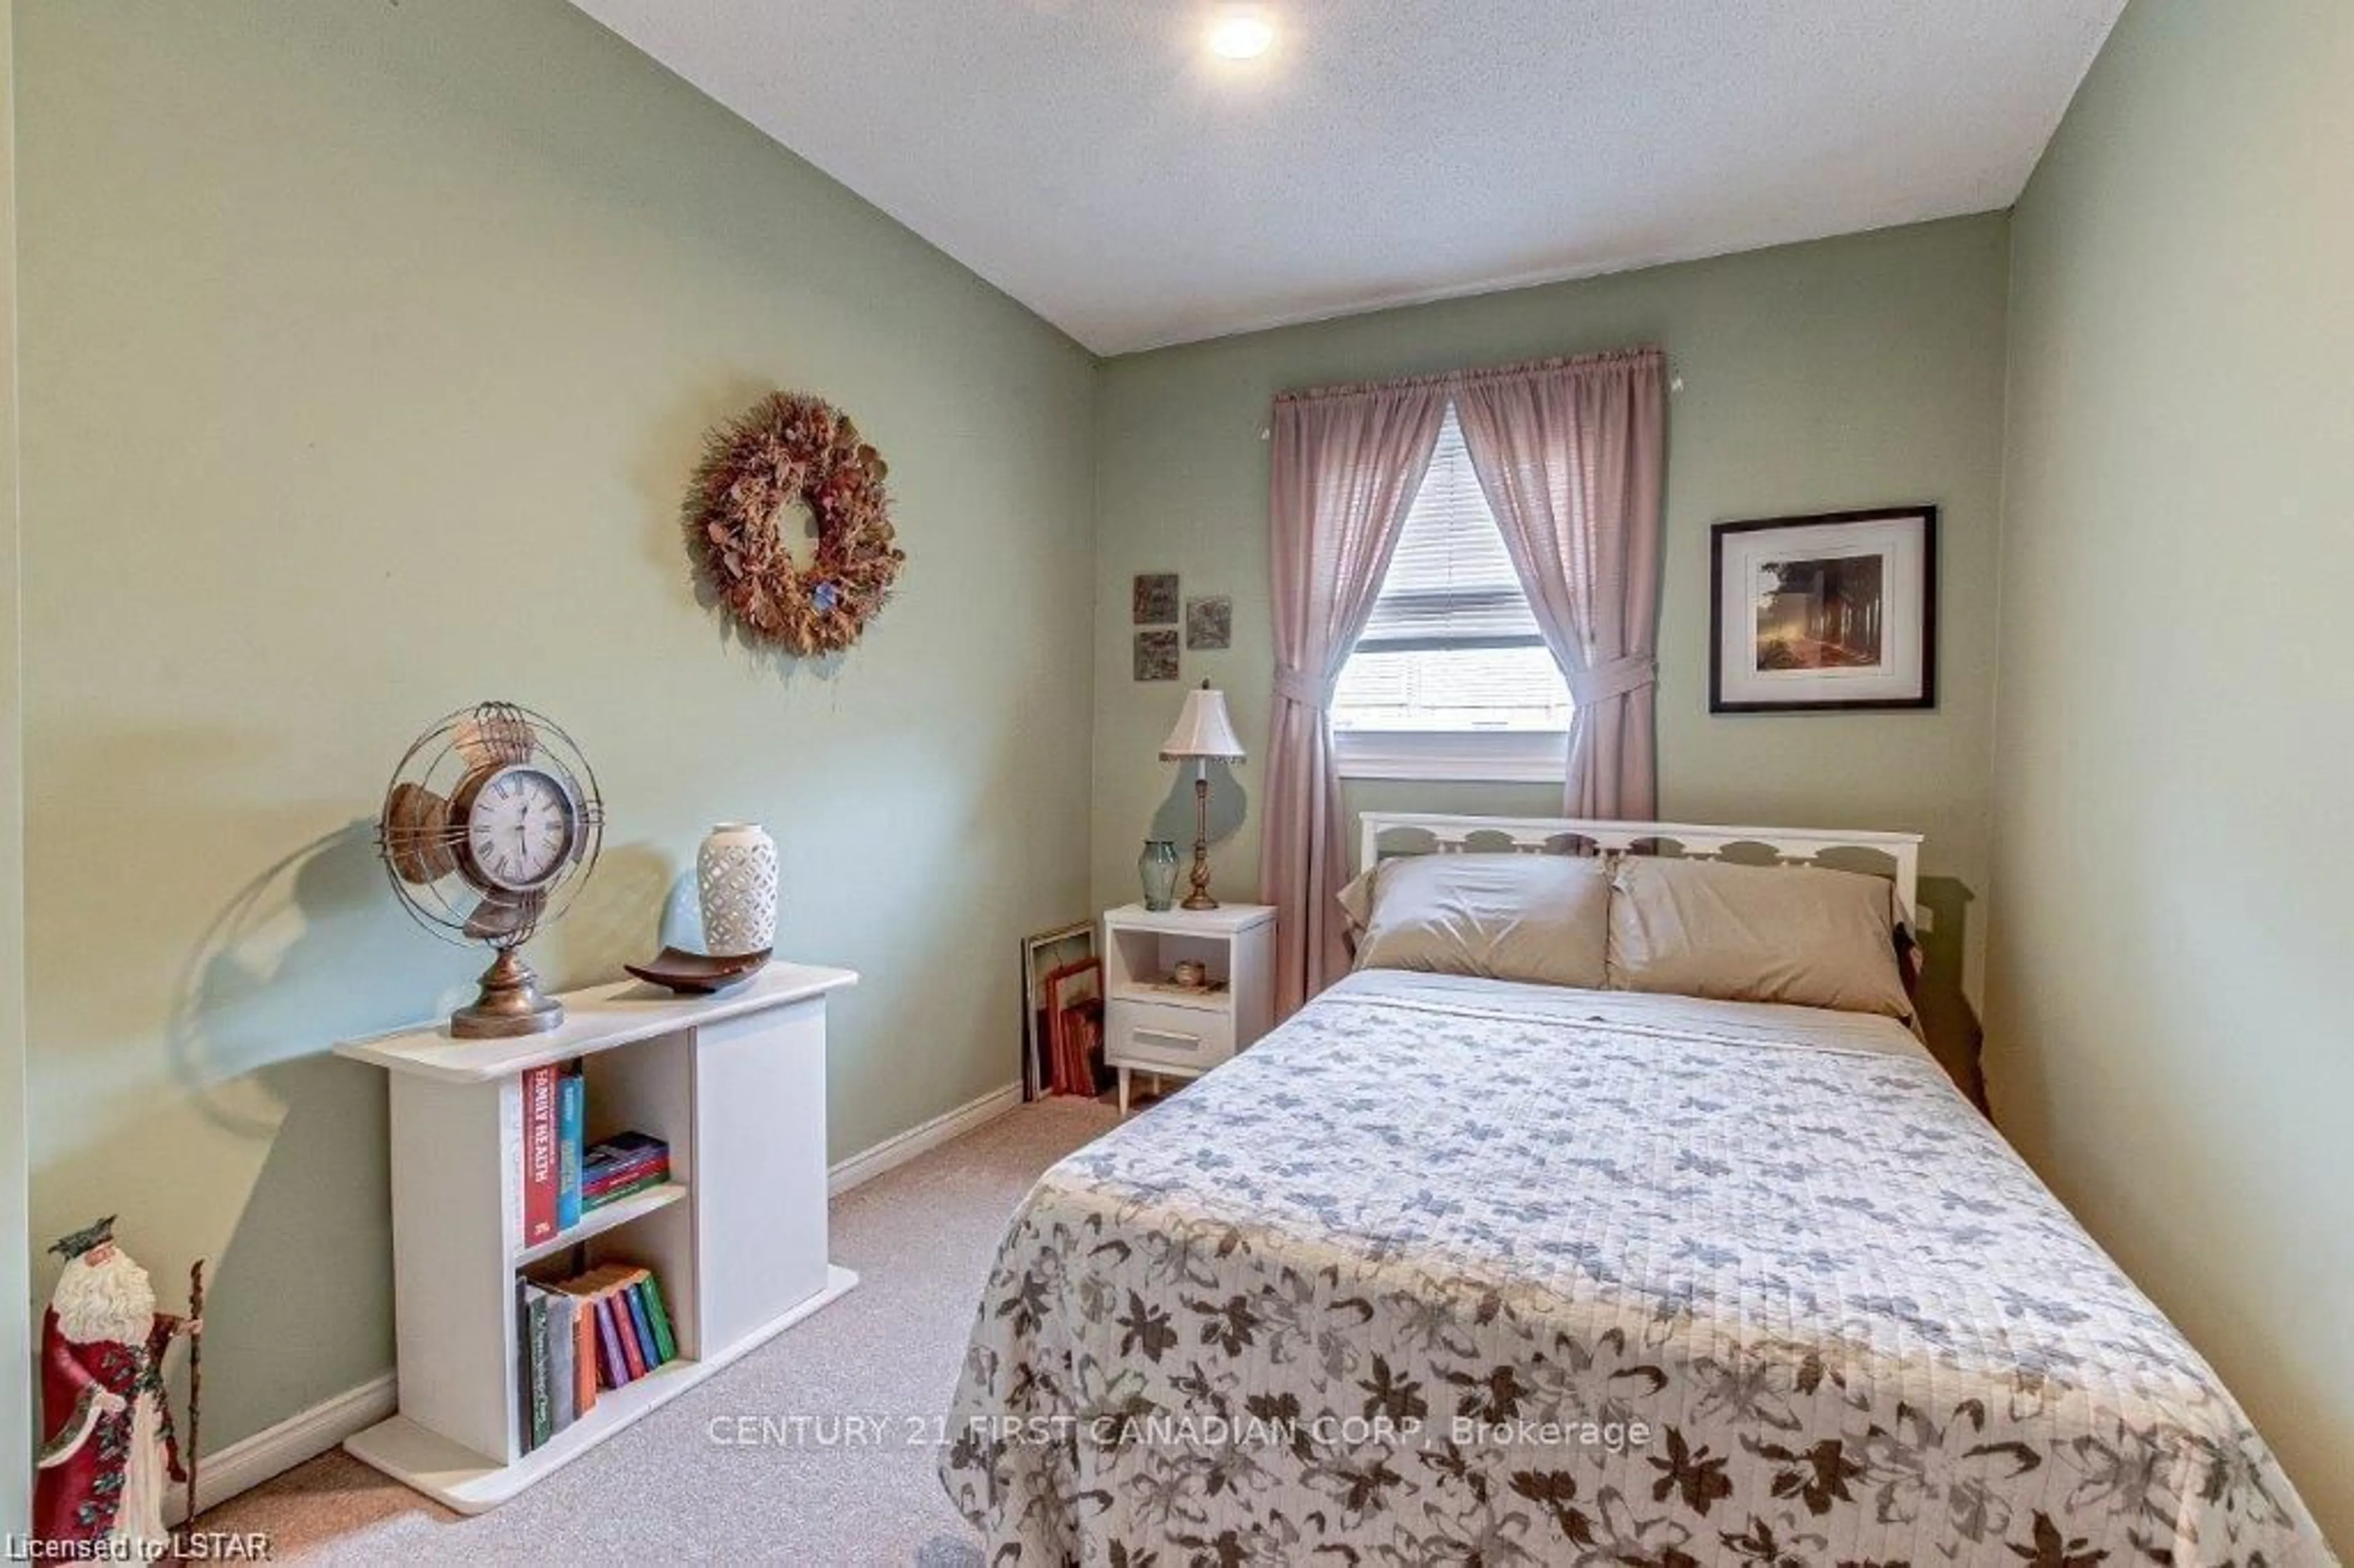 A pic of a room for 1199 Hamilton Rd #45, London Ontario N5W 5Z9